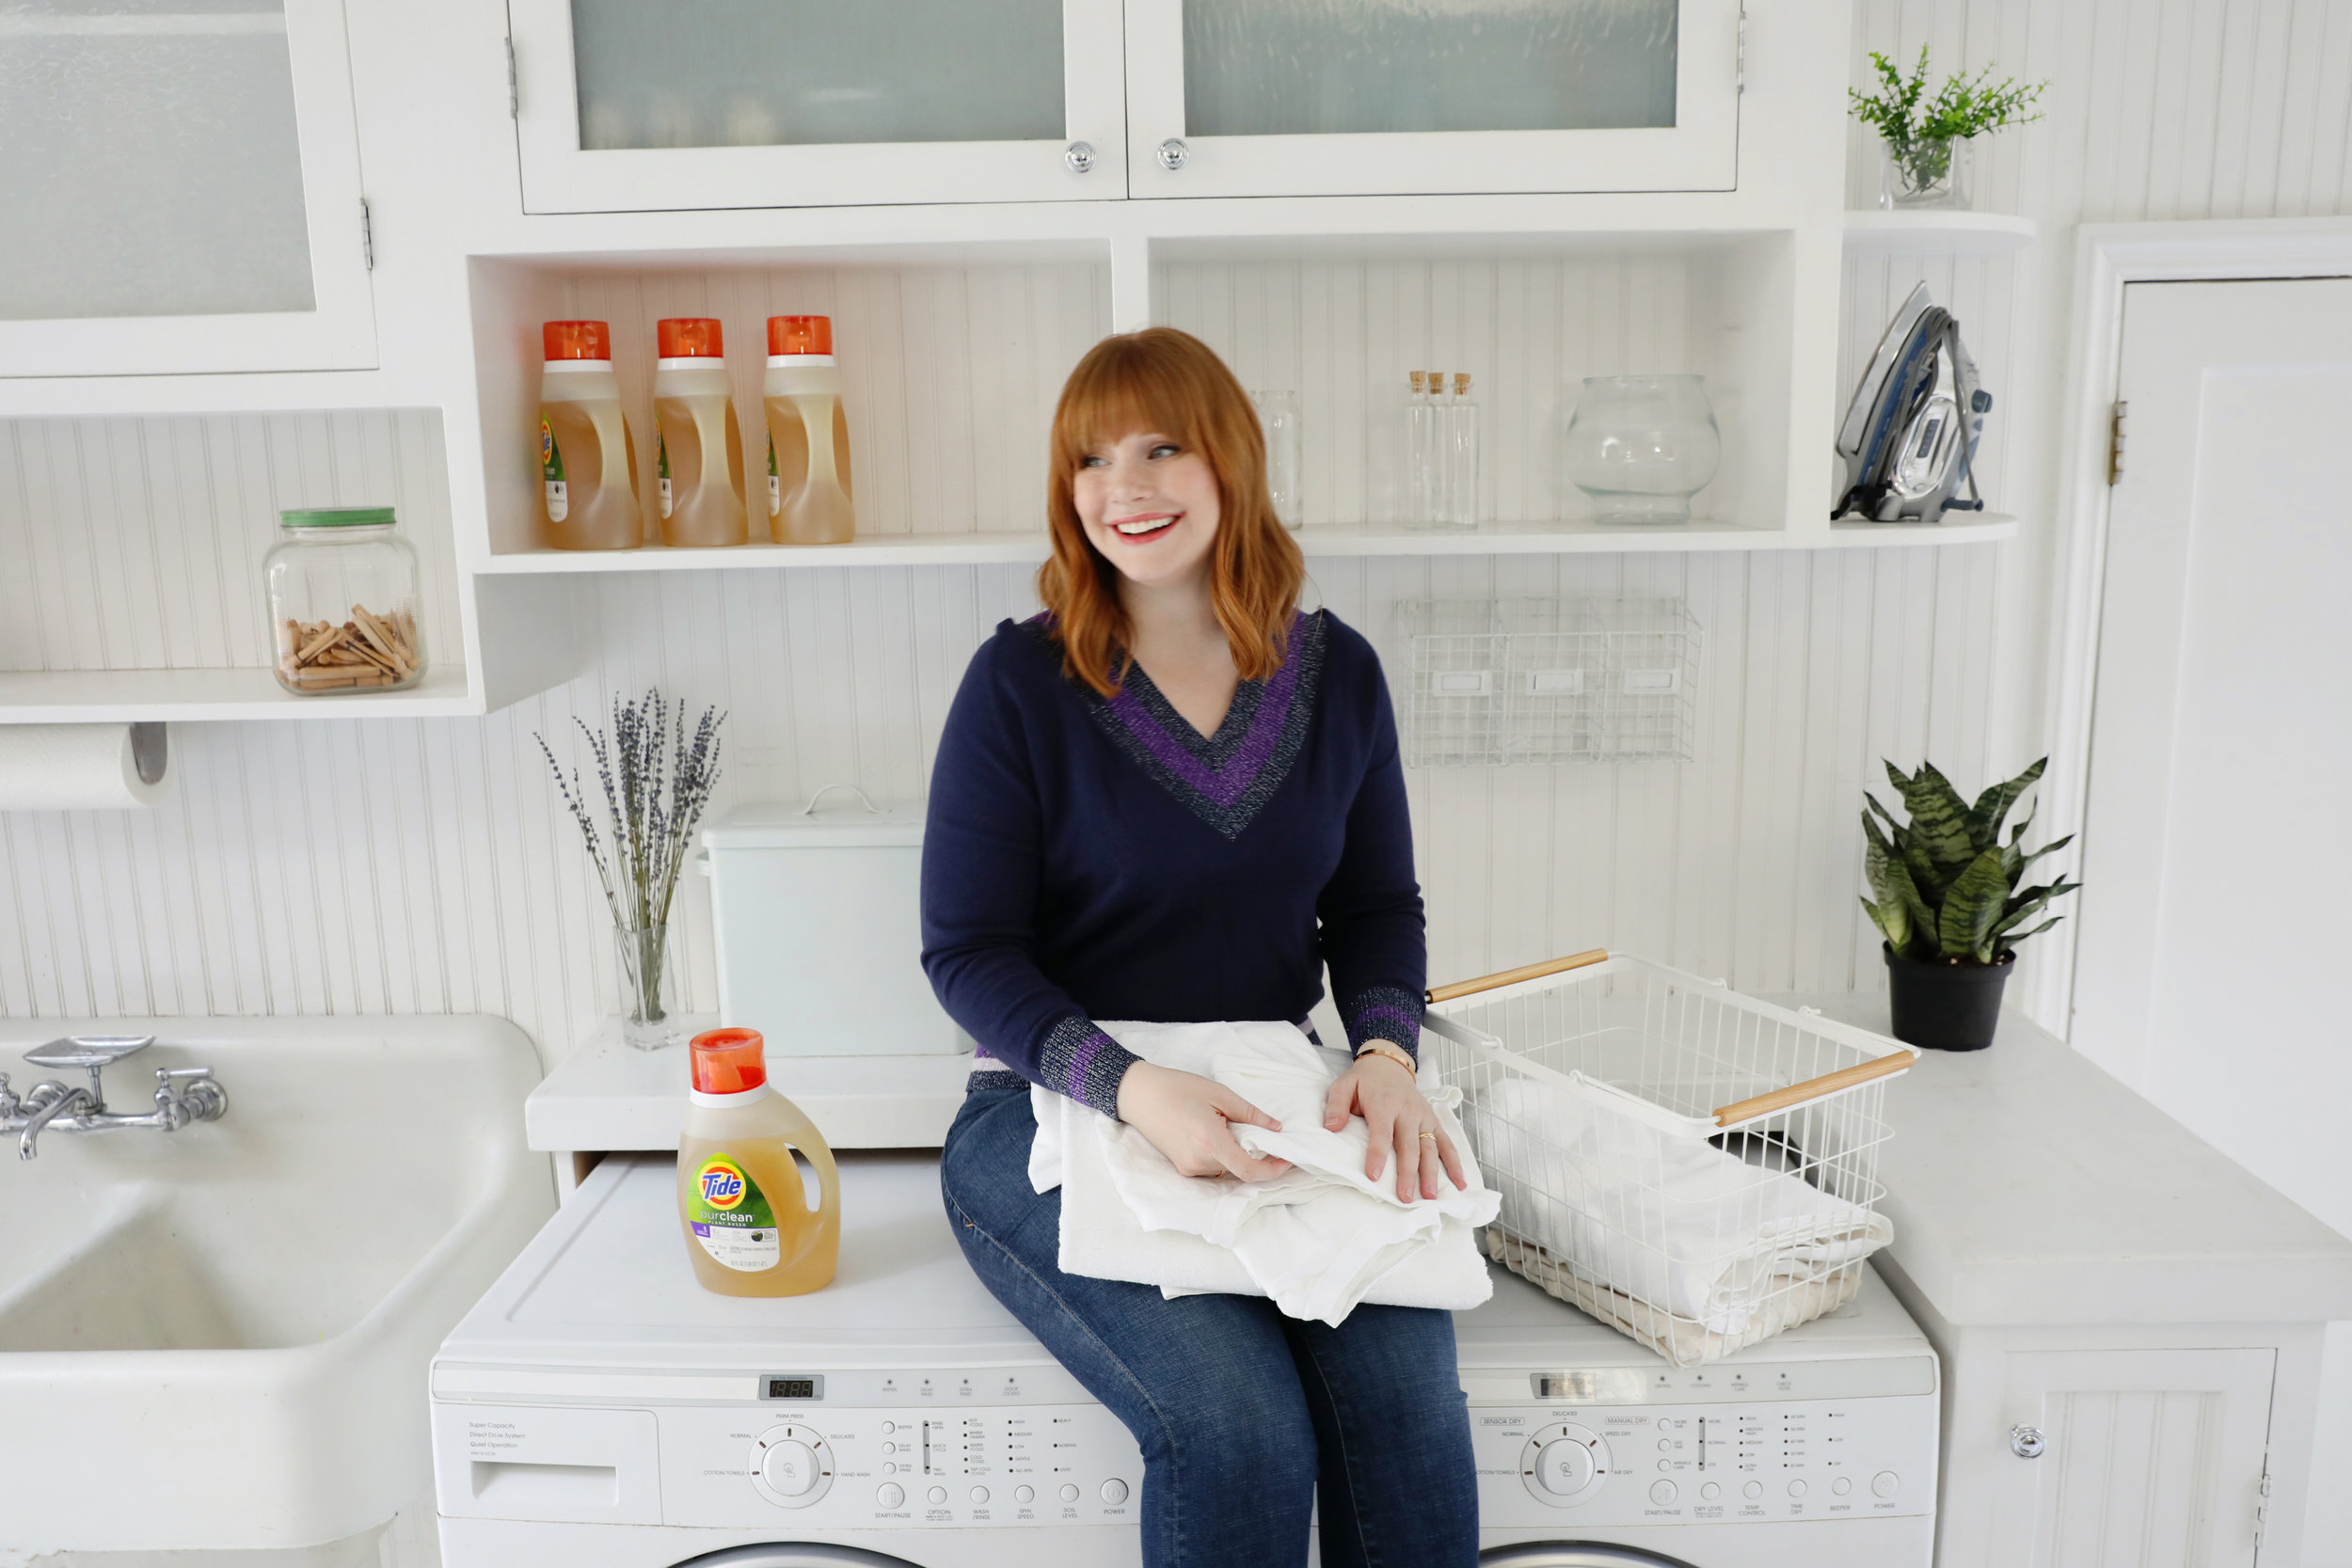 NYC commercial lifestyle photographer JENNIFER LAVELLE PHOTOGRAPHY - Procter &amp; Gamble, Tide Purclean, P&amp;G, Bryce Dallas Howard, New York City lifestyle photographer, Procter &amp; Gamble